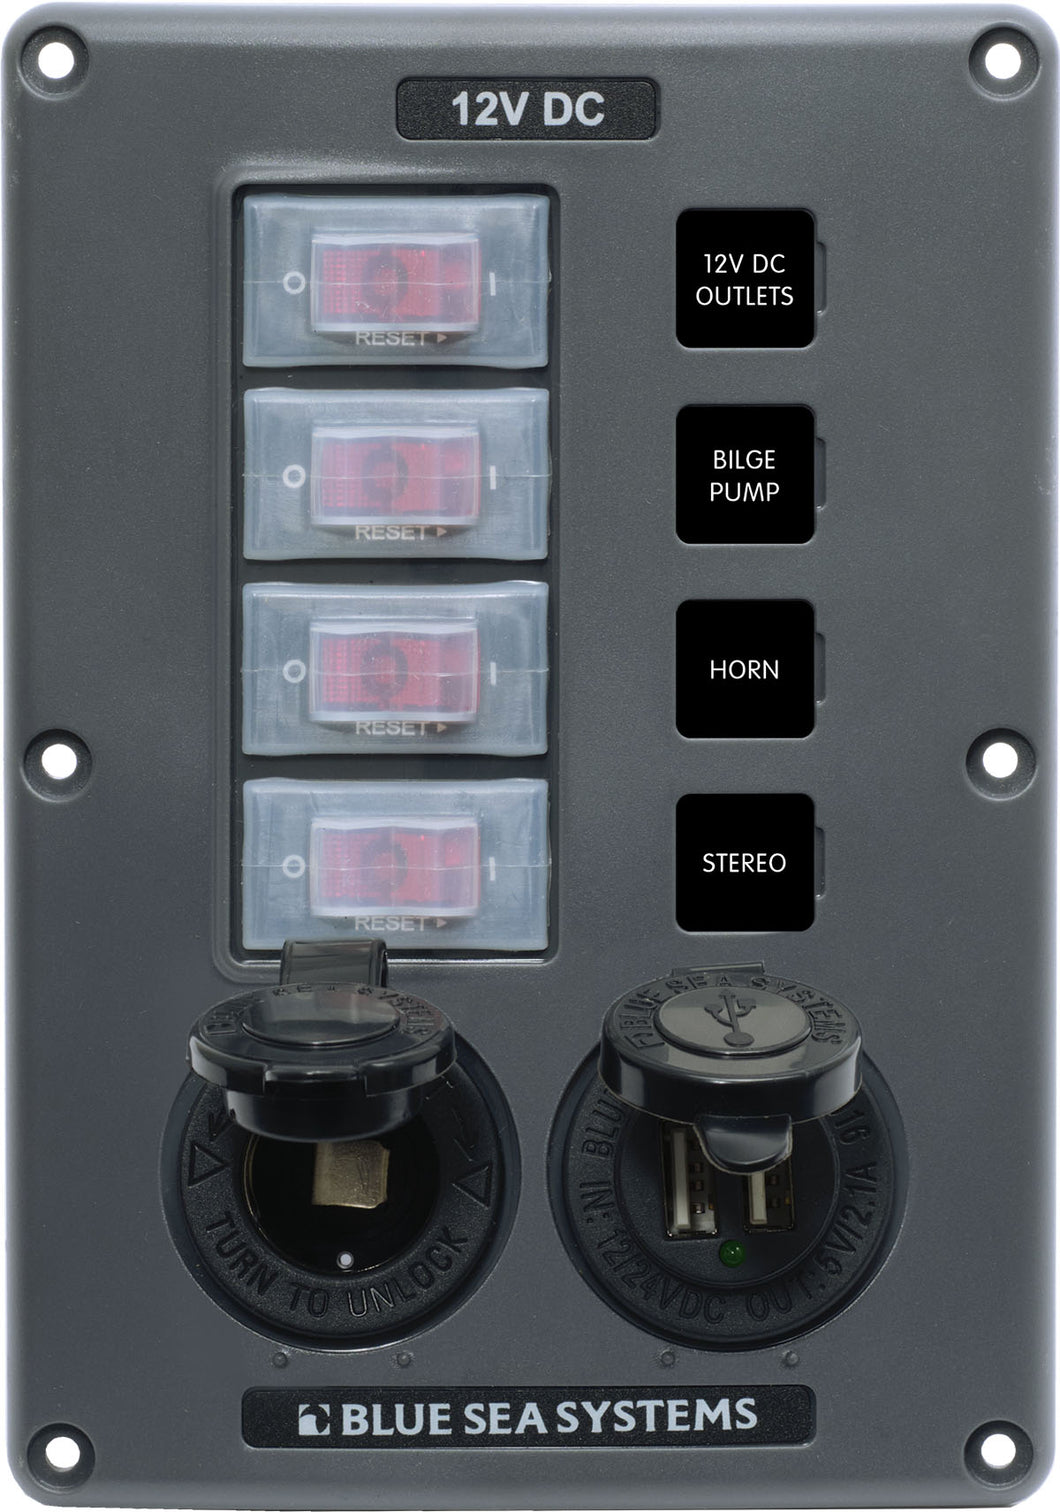 Blue Sea Water-resistant 12v 4 Circuit Breaker Switch Panel With 12v Socket And Dual Usb